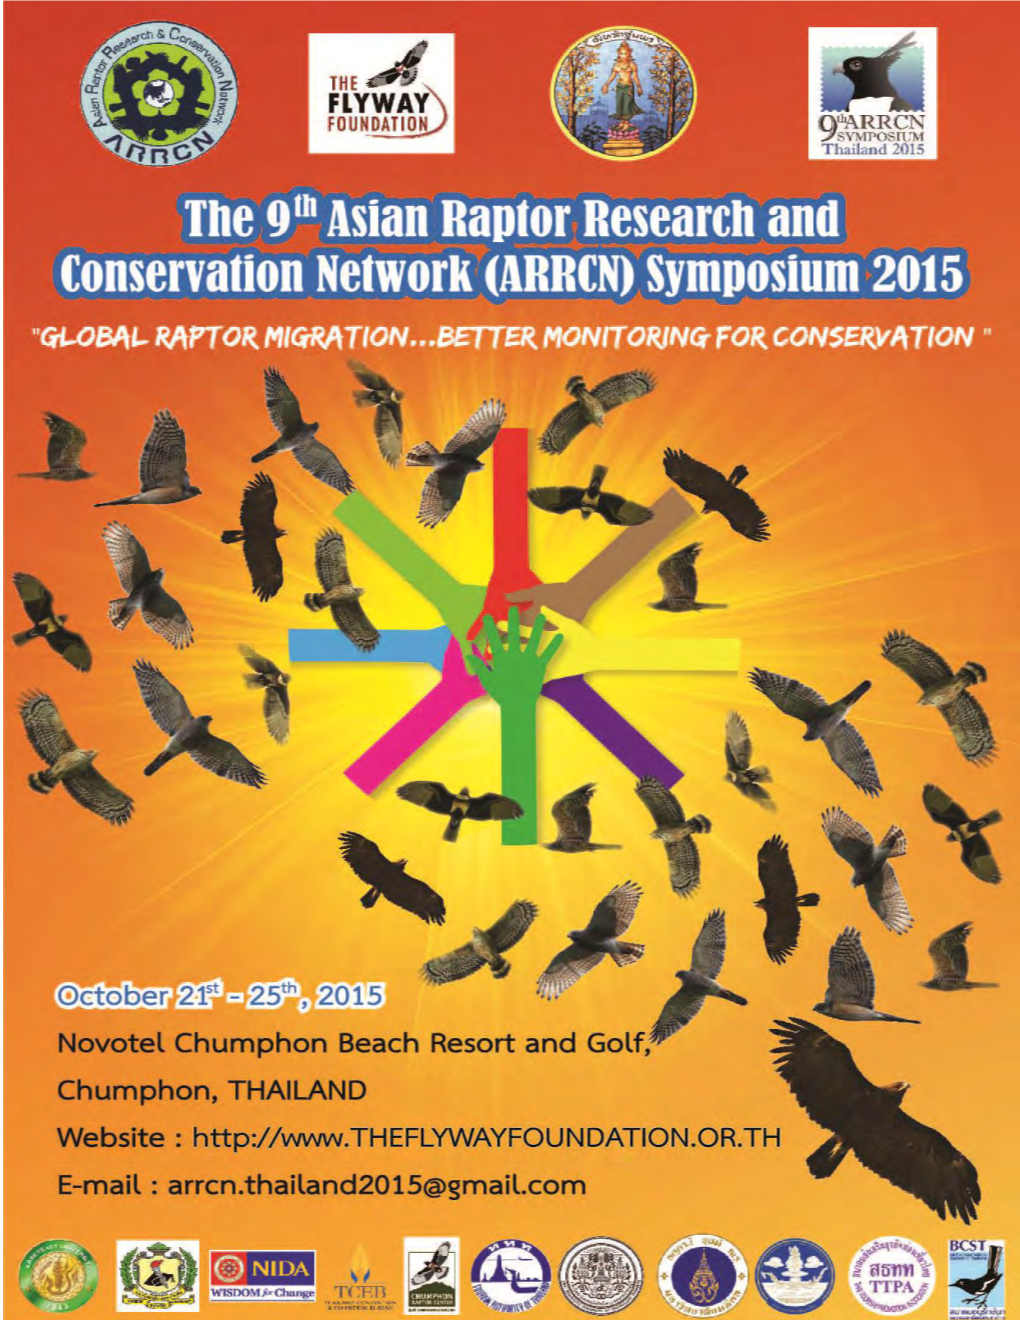 The 9Th Asian Raptor Research and Conservation Network (ARRCN) Symposium 2015, Novotel Chumphon Beach Resort and Golf, Chumphon, Thailand; October 21–25, 2015